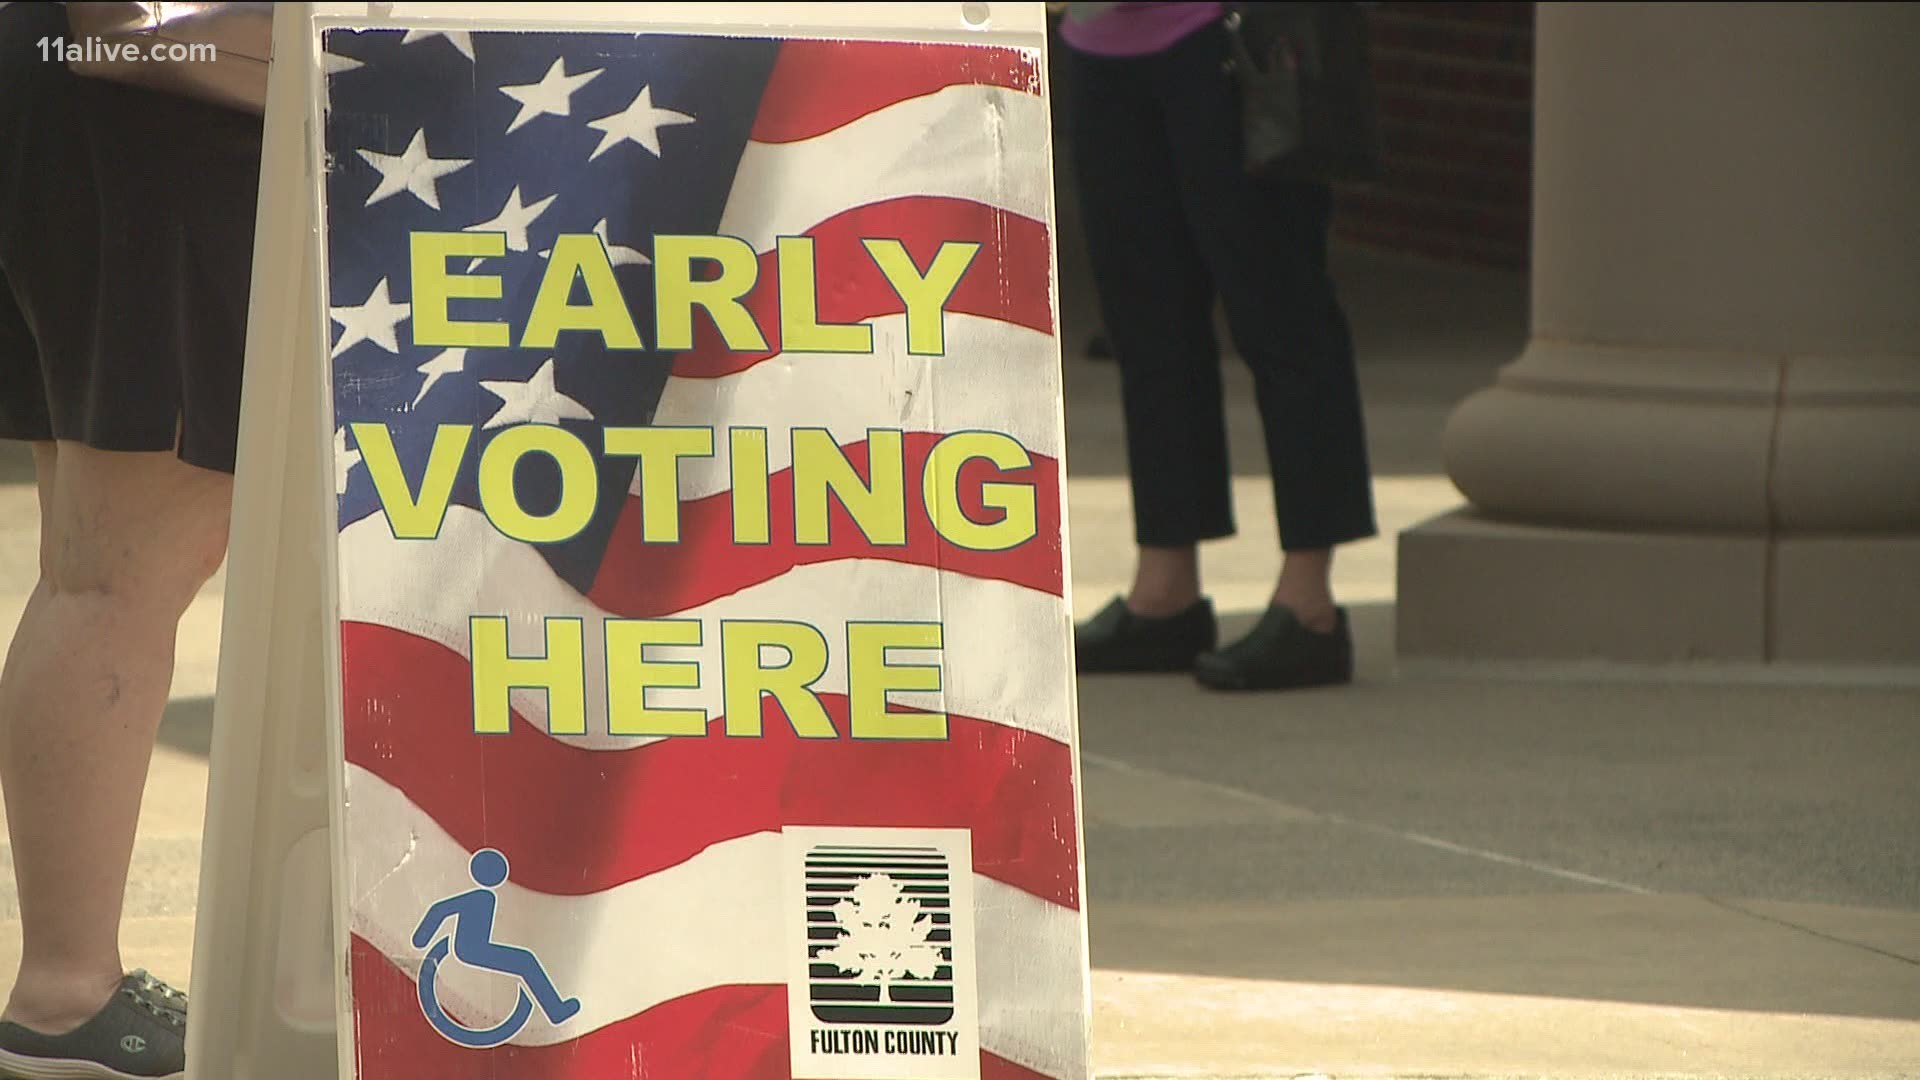 Starting Wednesday, polling places will open at 7 a.m. – two hours earlier than originally planned – in Fulton County.